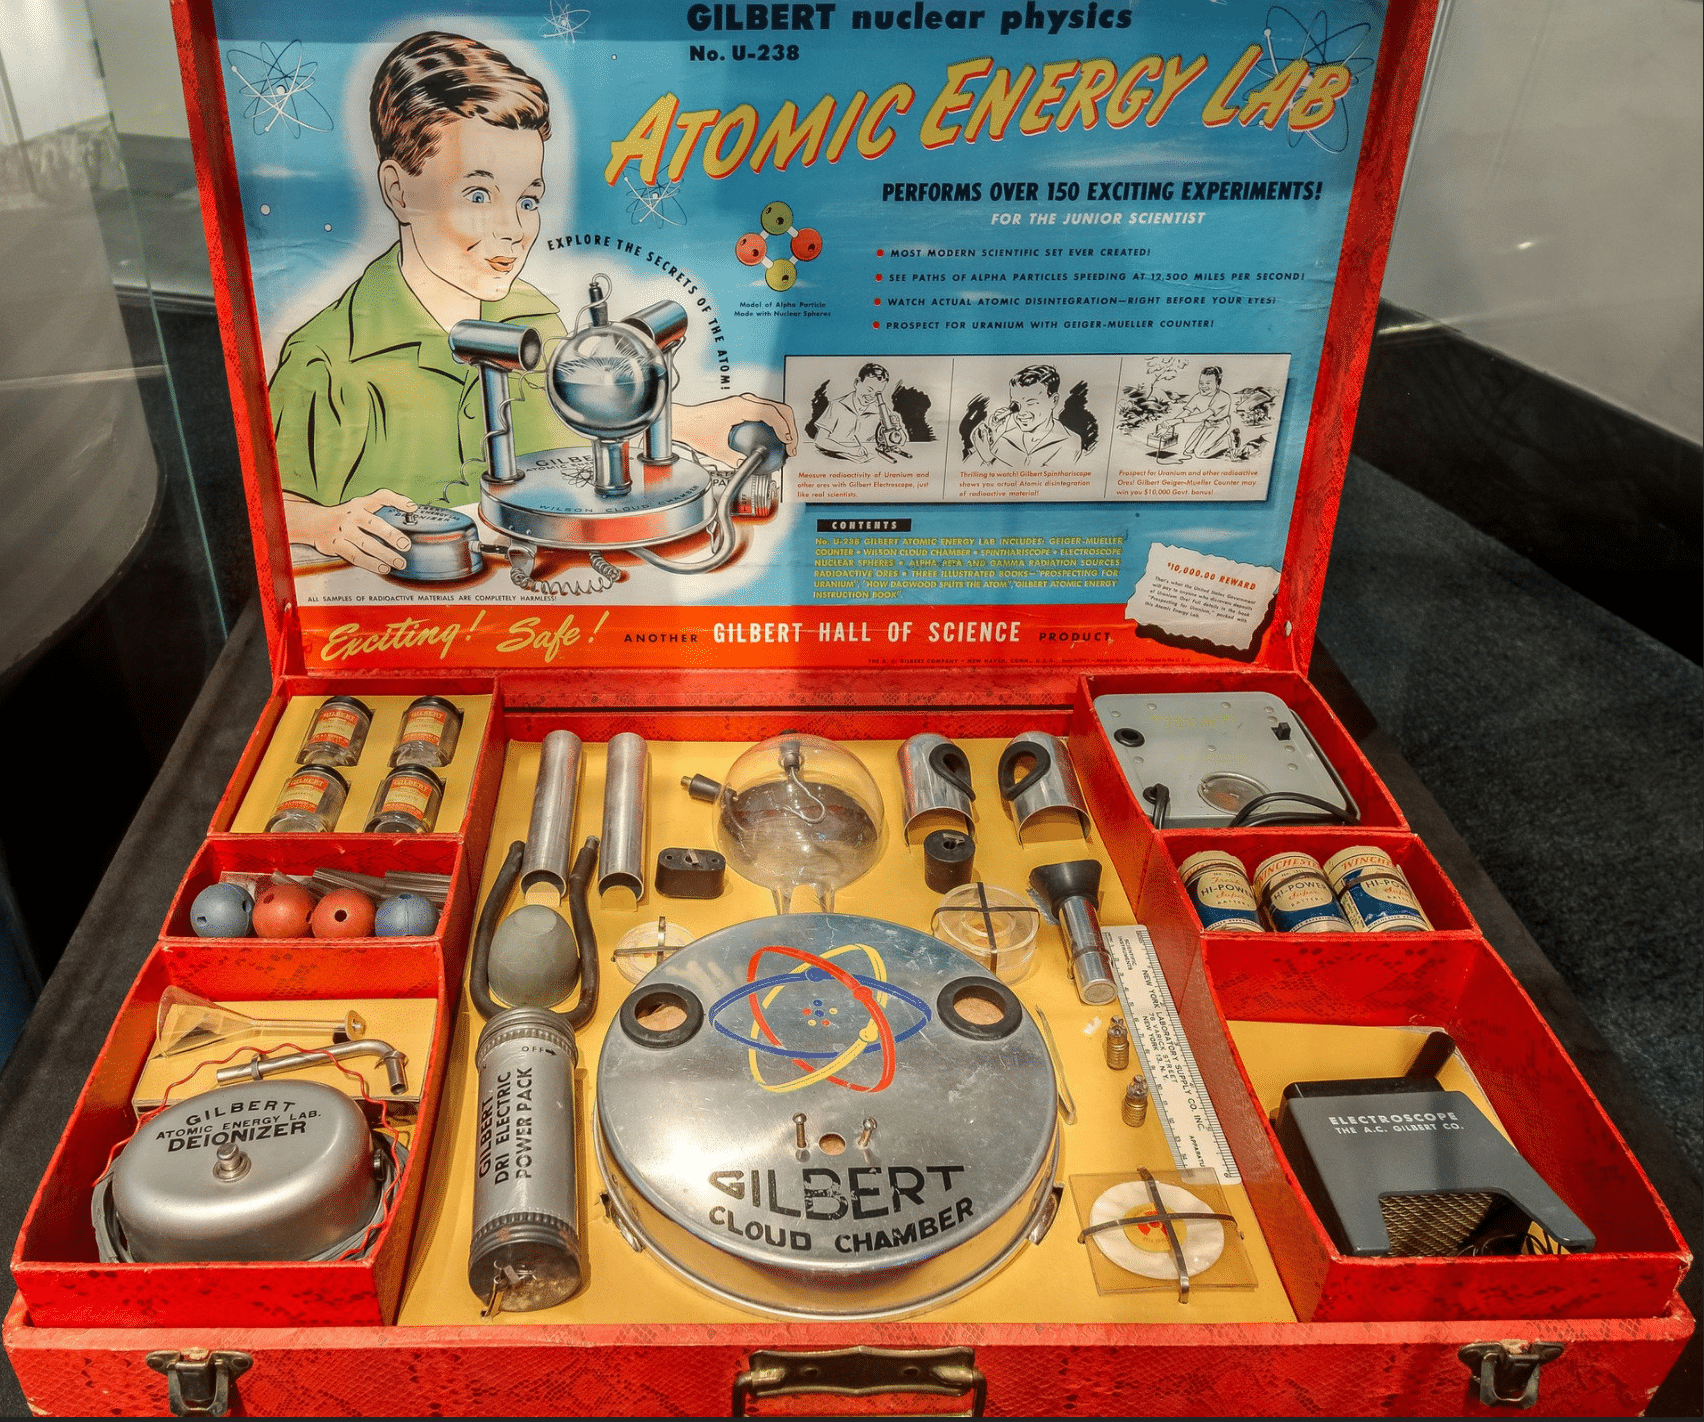 World's Most Dangerous Toy? Radioactive Atomic Energy Lab Kit with Uranium  (1950) - Bulletin of the Atomic Scientists